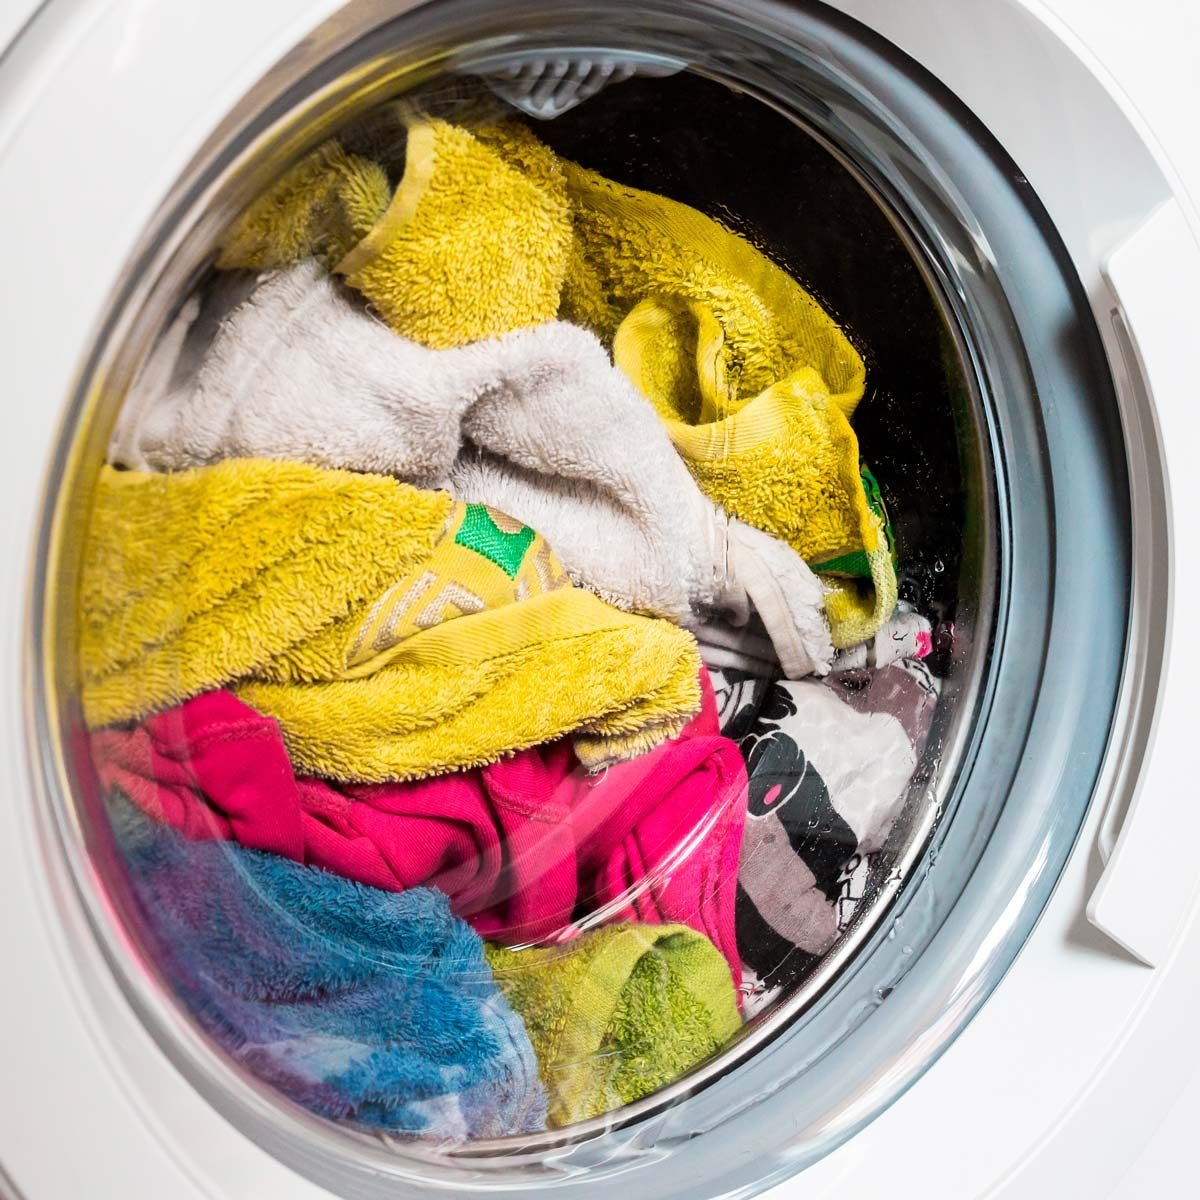 How To Clean a Washing Machine - How to Clean Front or Top Loading